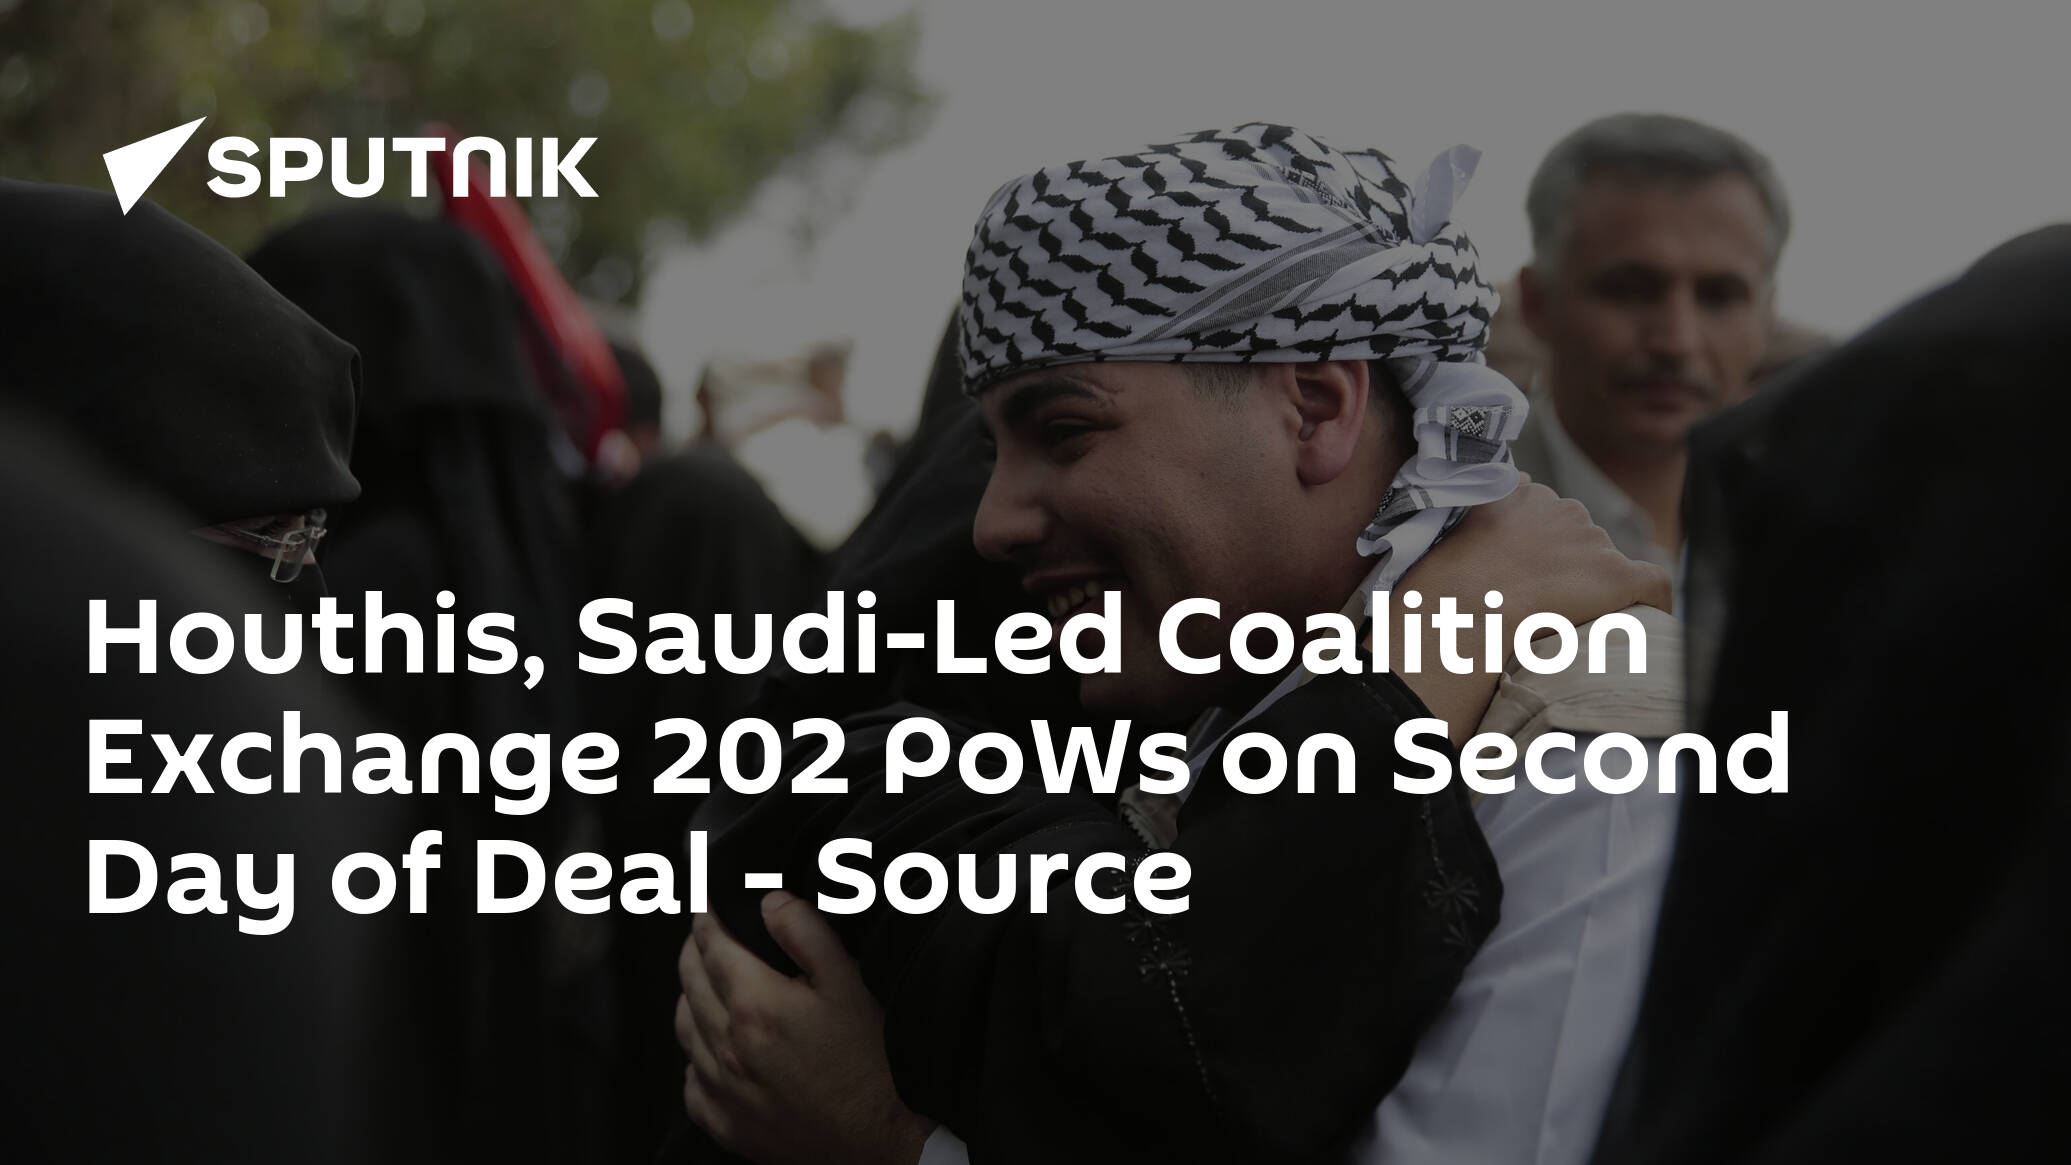 Houthis, Saudi-Led Coalition Exchange 202 PoWs on Second Day of Deal – Source